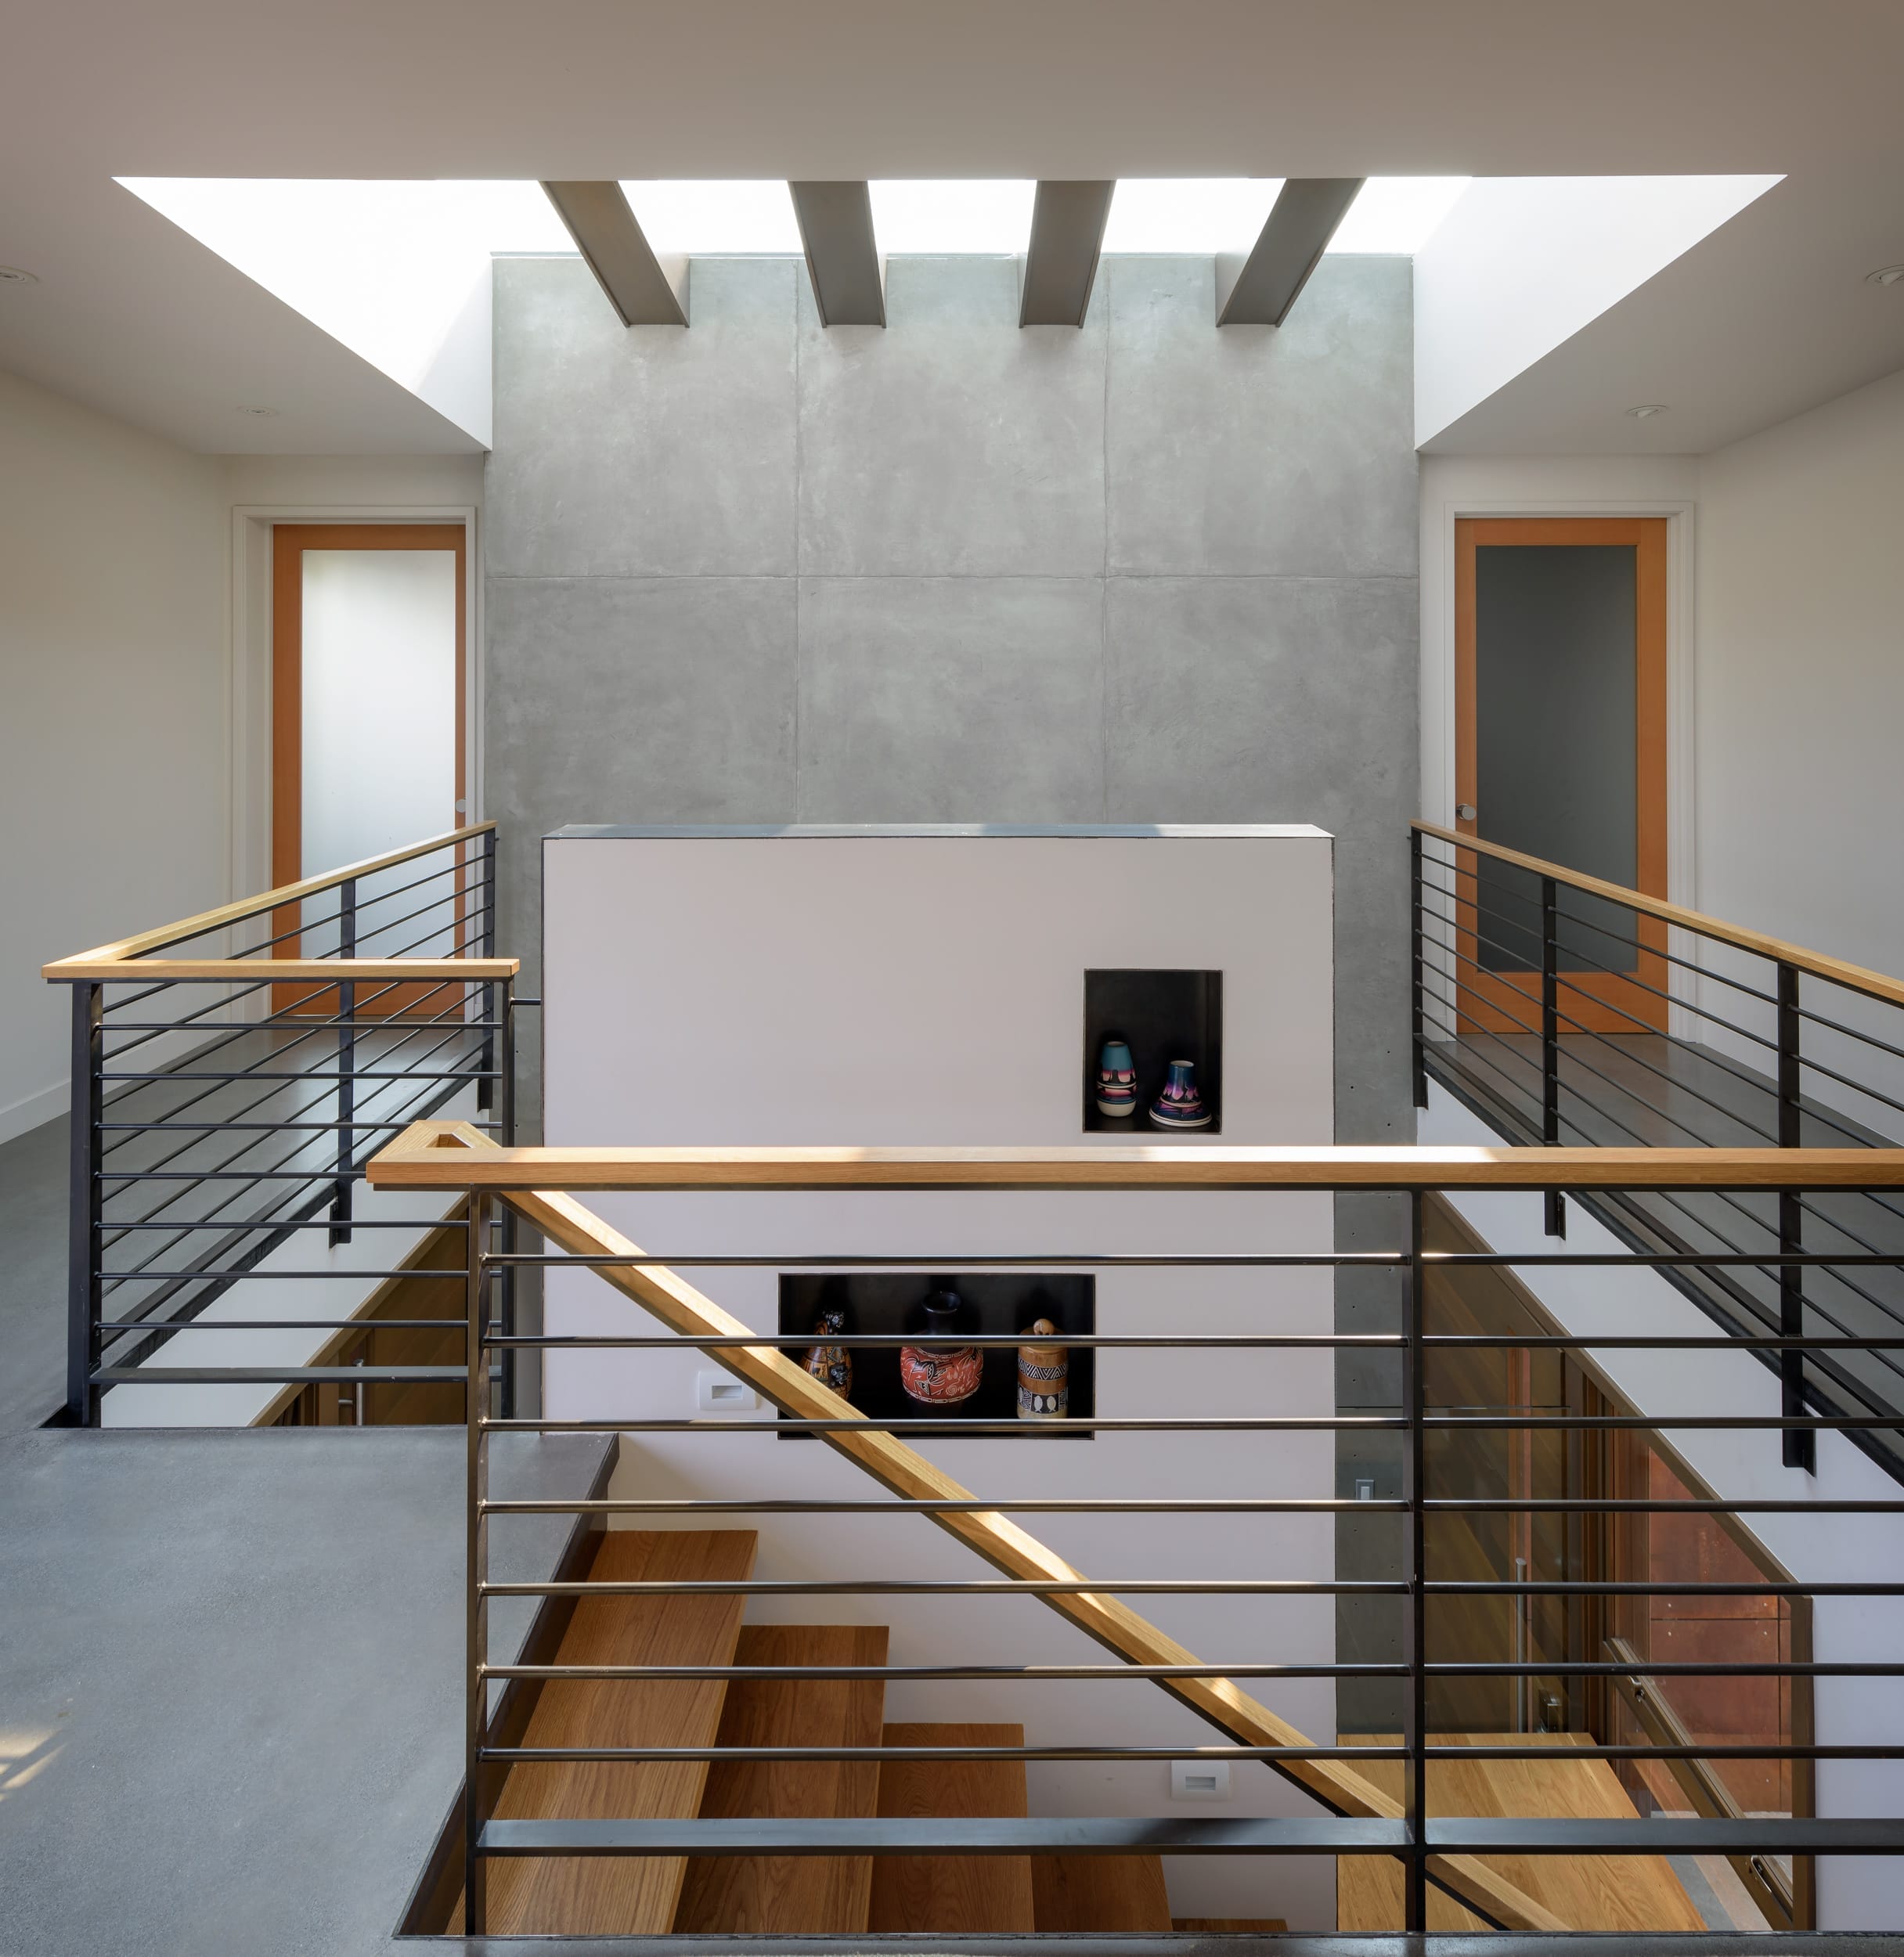 A staircase in a modern house with metal railings.